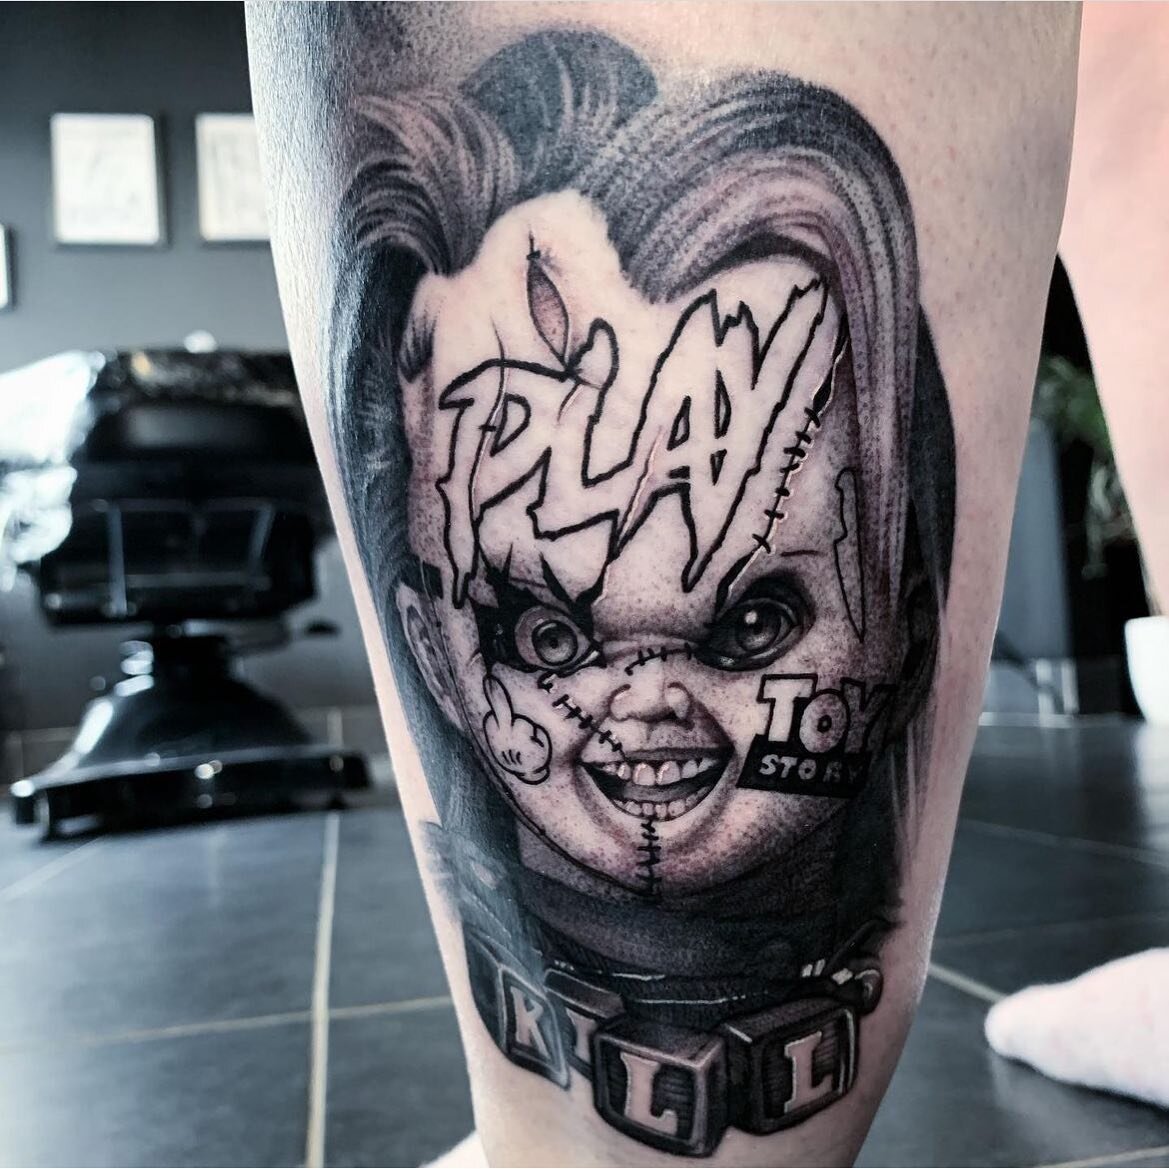 We are pleased to announce @_ricky_wright_ from @artfusion13doncaster will be working @skindeep_uk Tattoo Freeze 2023🥶4th-5th February 2023, Telford International Centre, Telford.

To book in with Ricky please drop a DM

#tattooconventions #tattooev